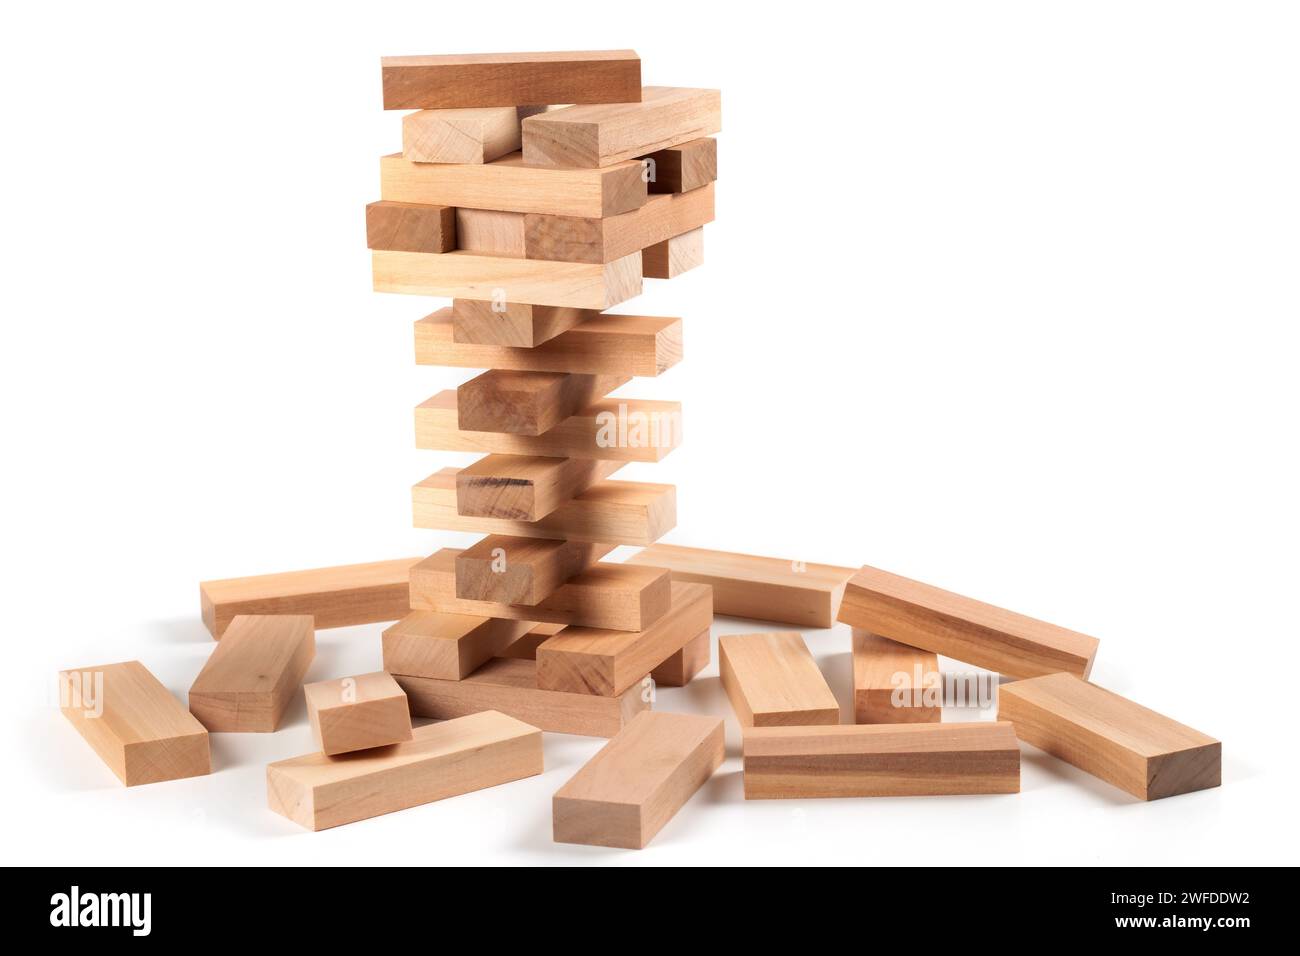 A game of logic and the ability to think. Jenga tower with wooden blocks on a white background. The tower is half dismantled Stock Photo